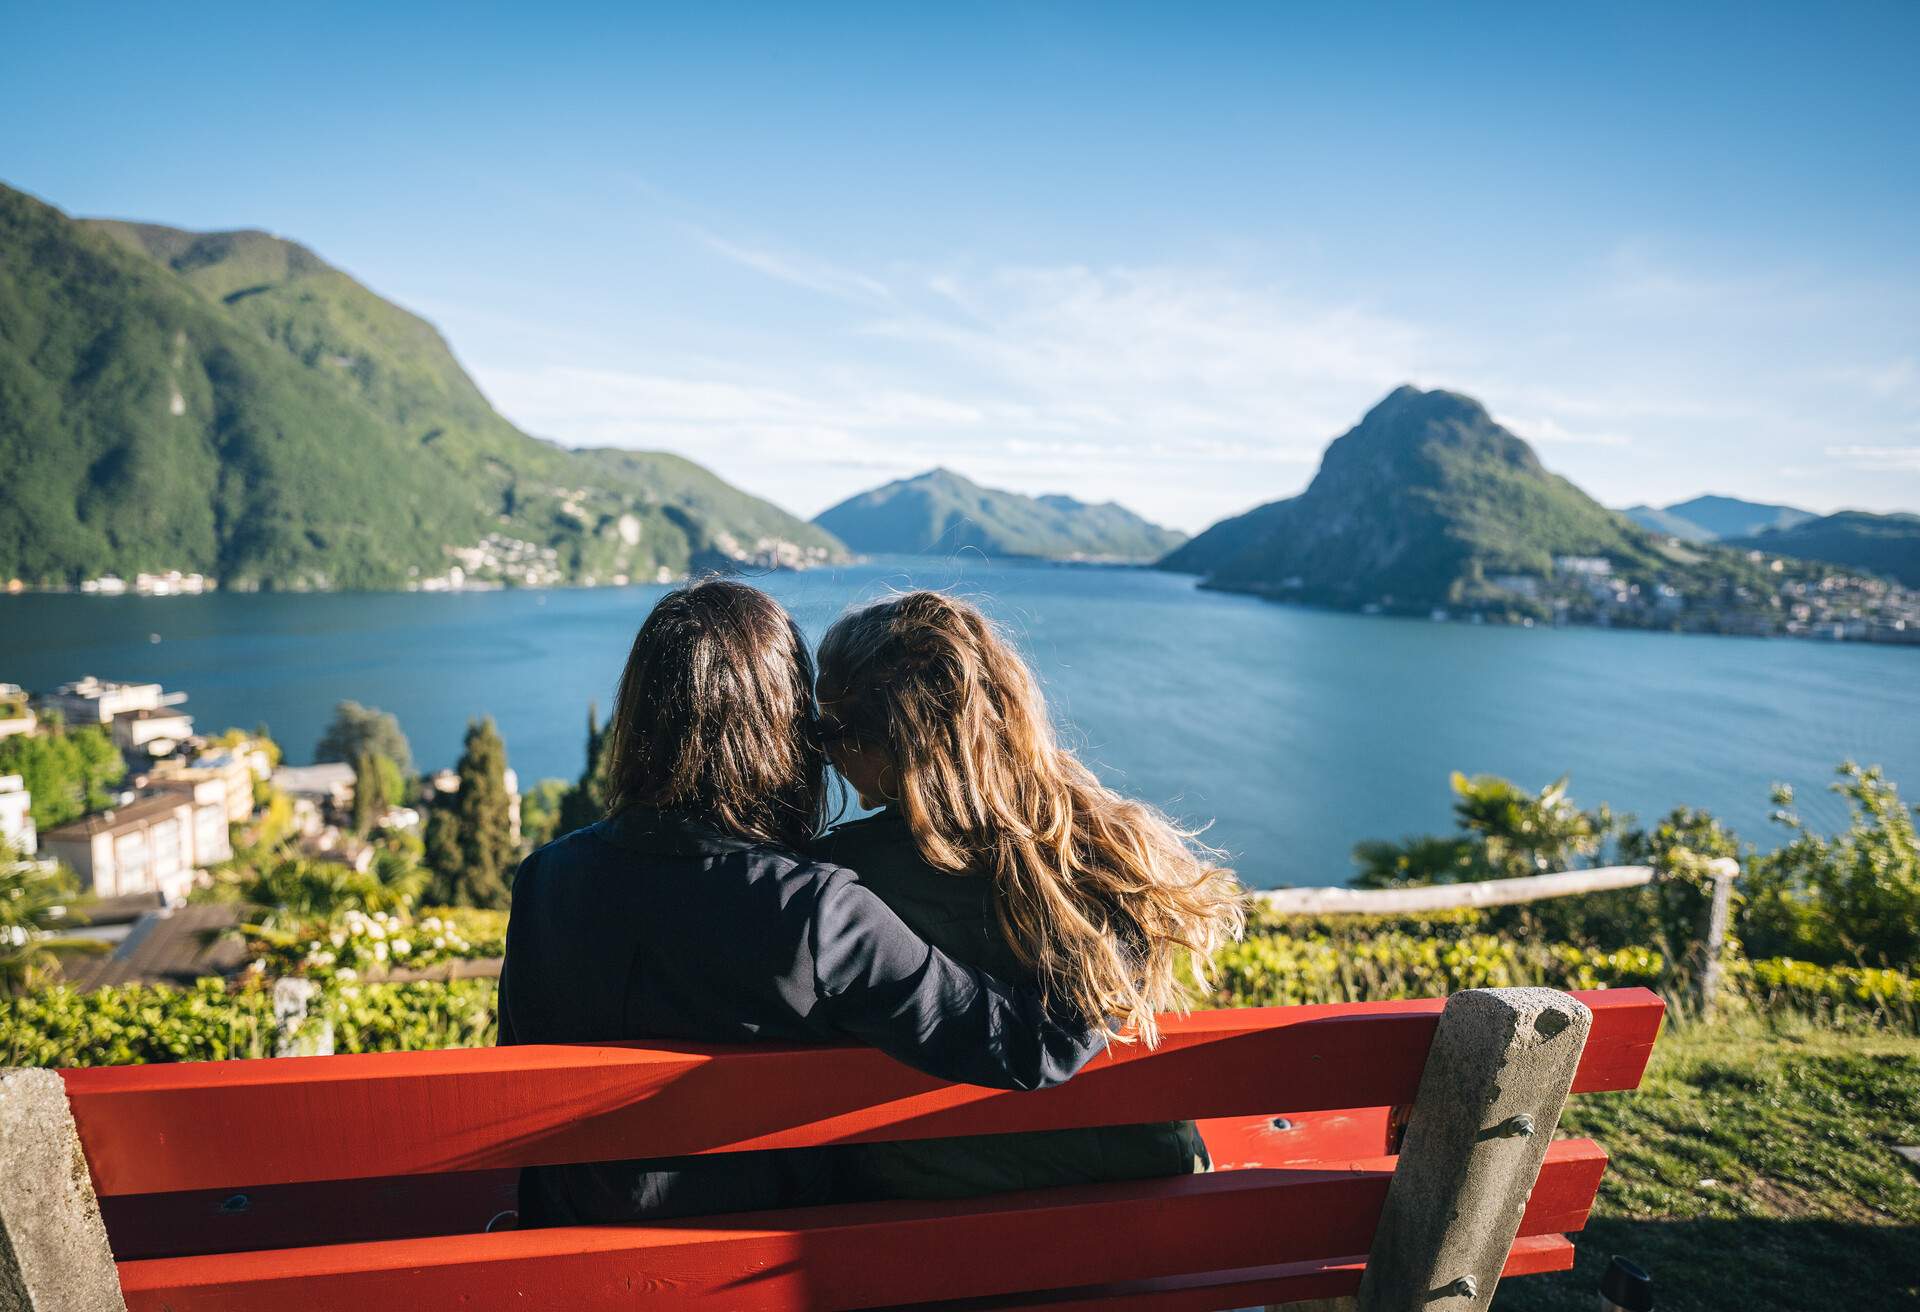 They embrace and look off to coastline of Lake Lugano behind